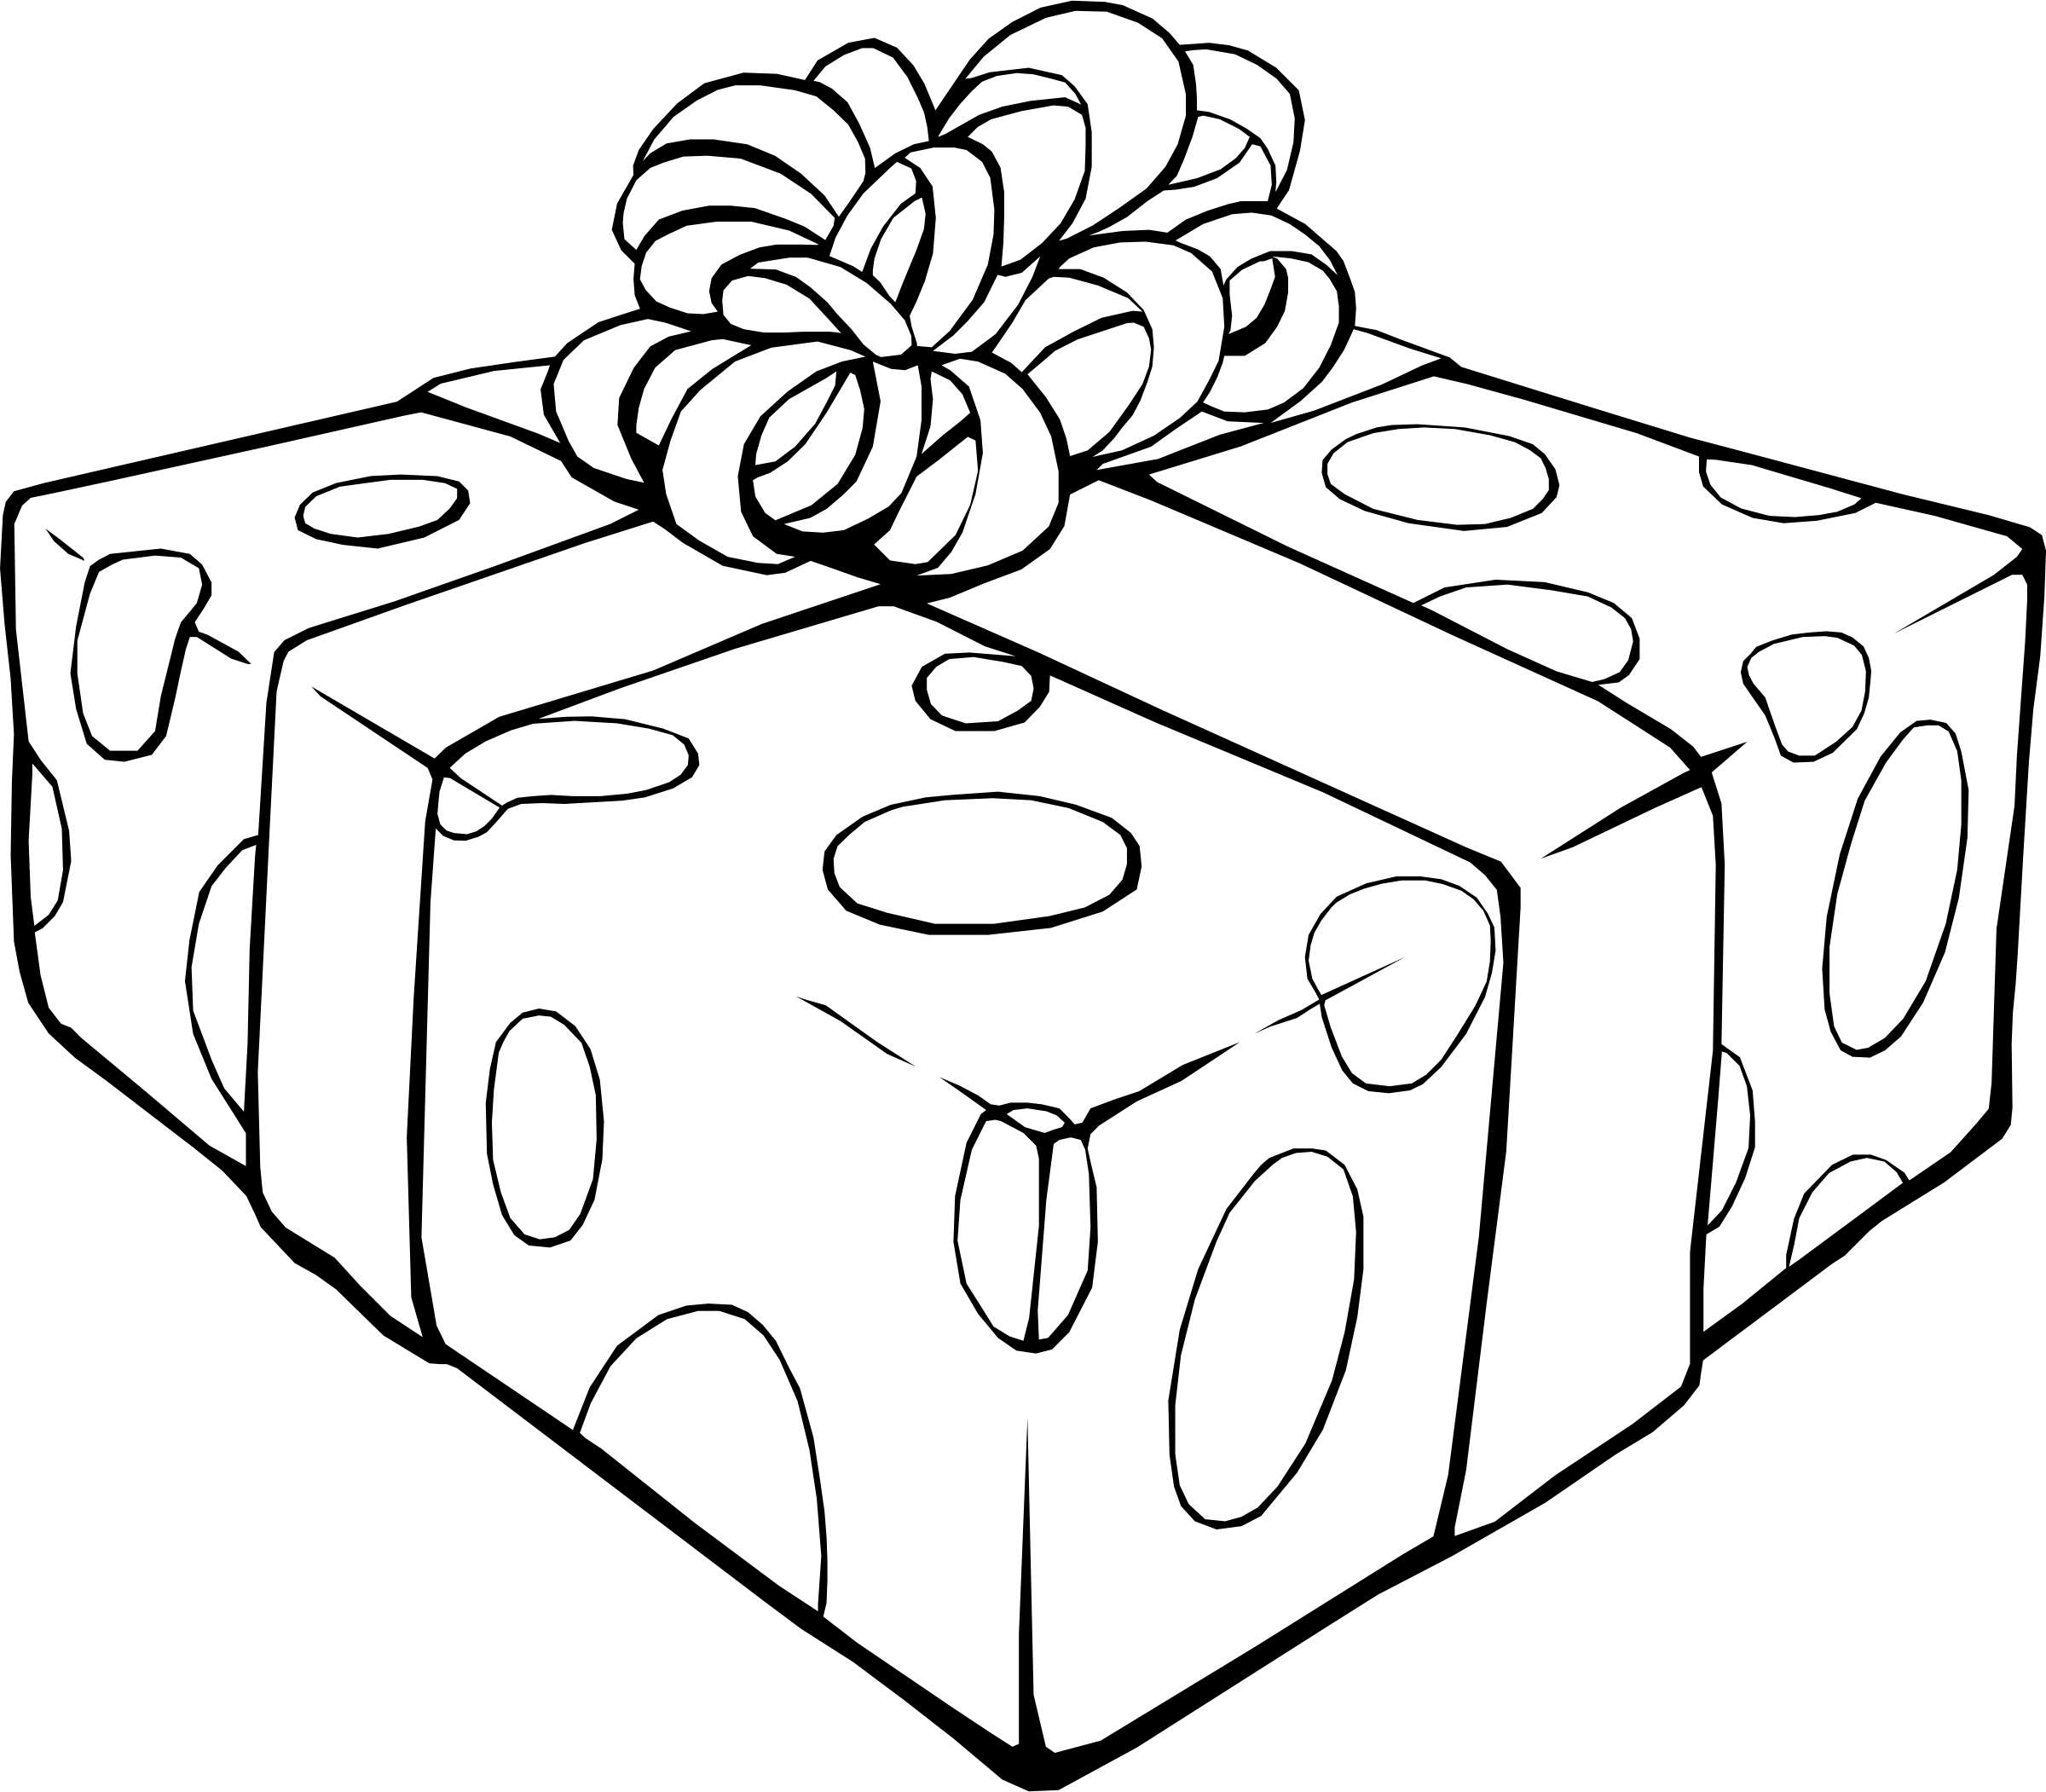 Birthday drawing at getdrawings. Clipart present sketch